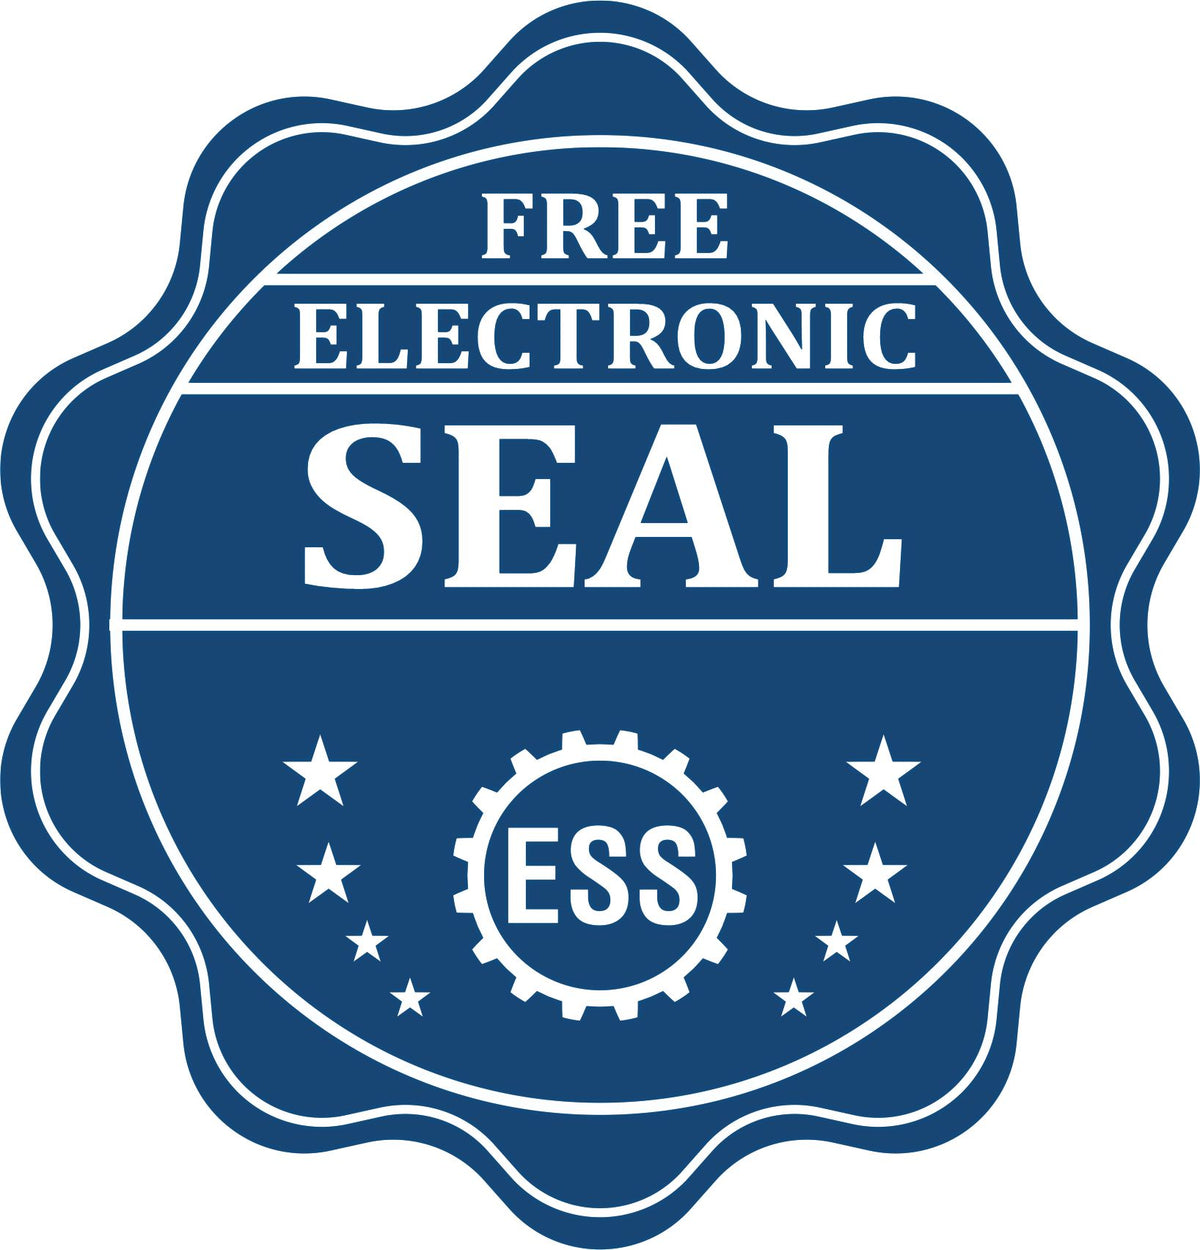 A badge showing a free electronic seal for the Heavy Duty Cast Iron Texas Geologist Seal Embosser with stars and the ESS gear on the emblem.